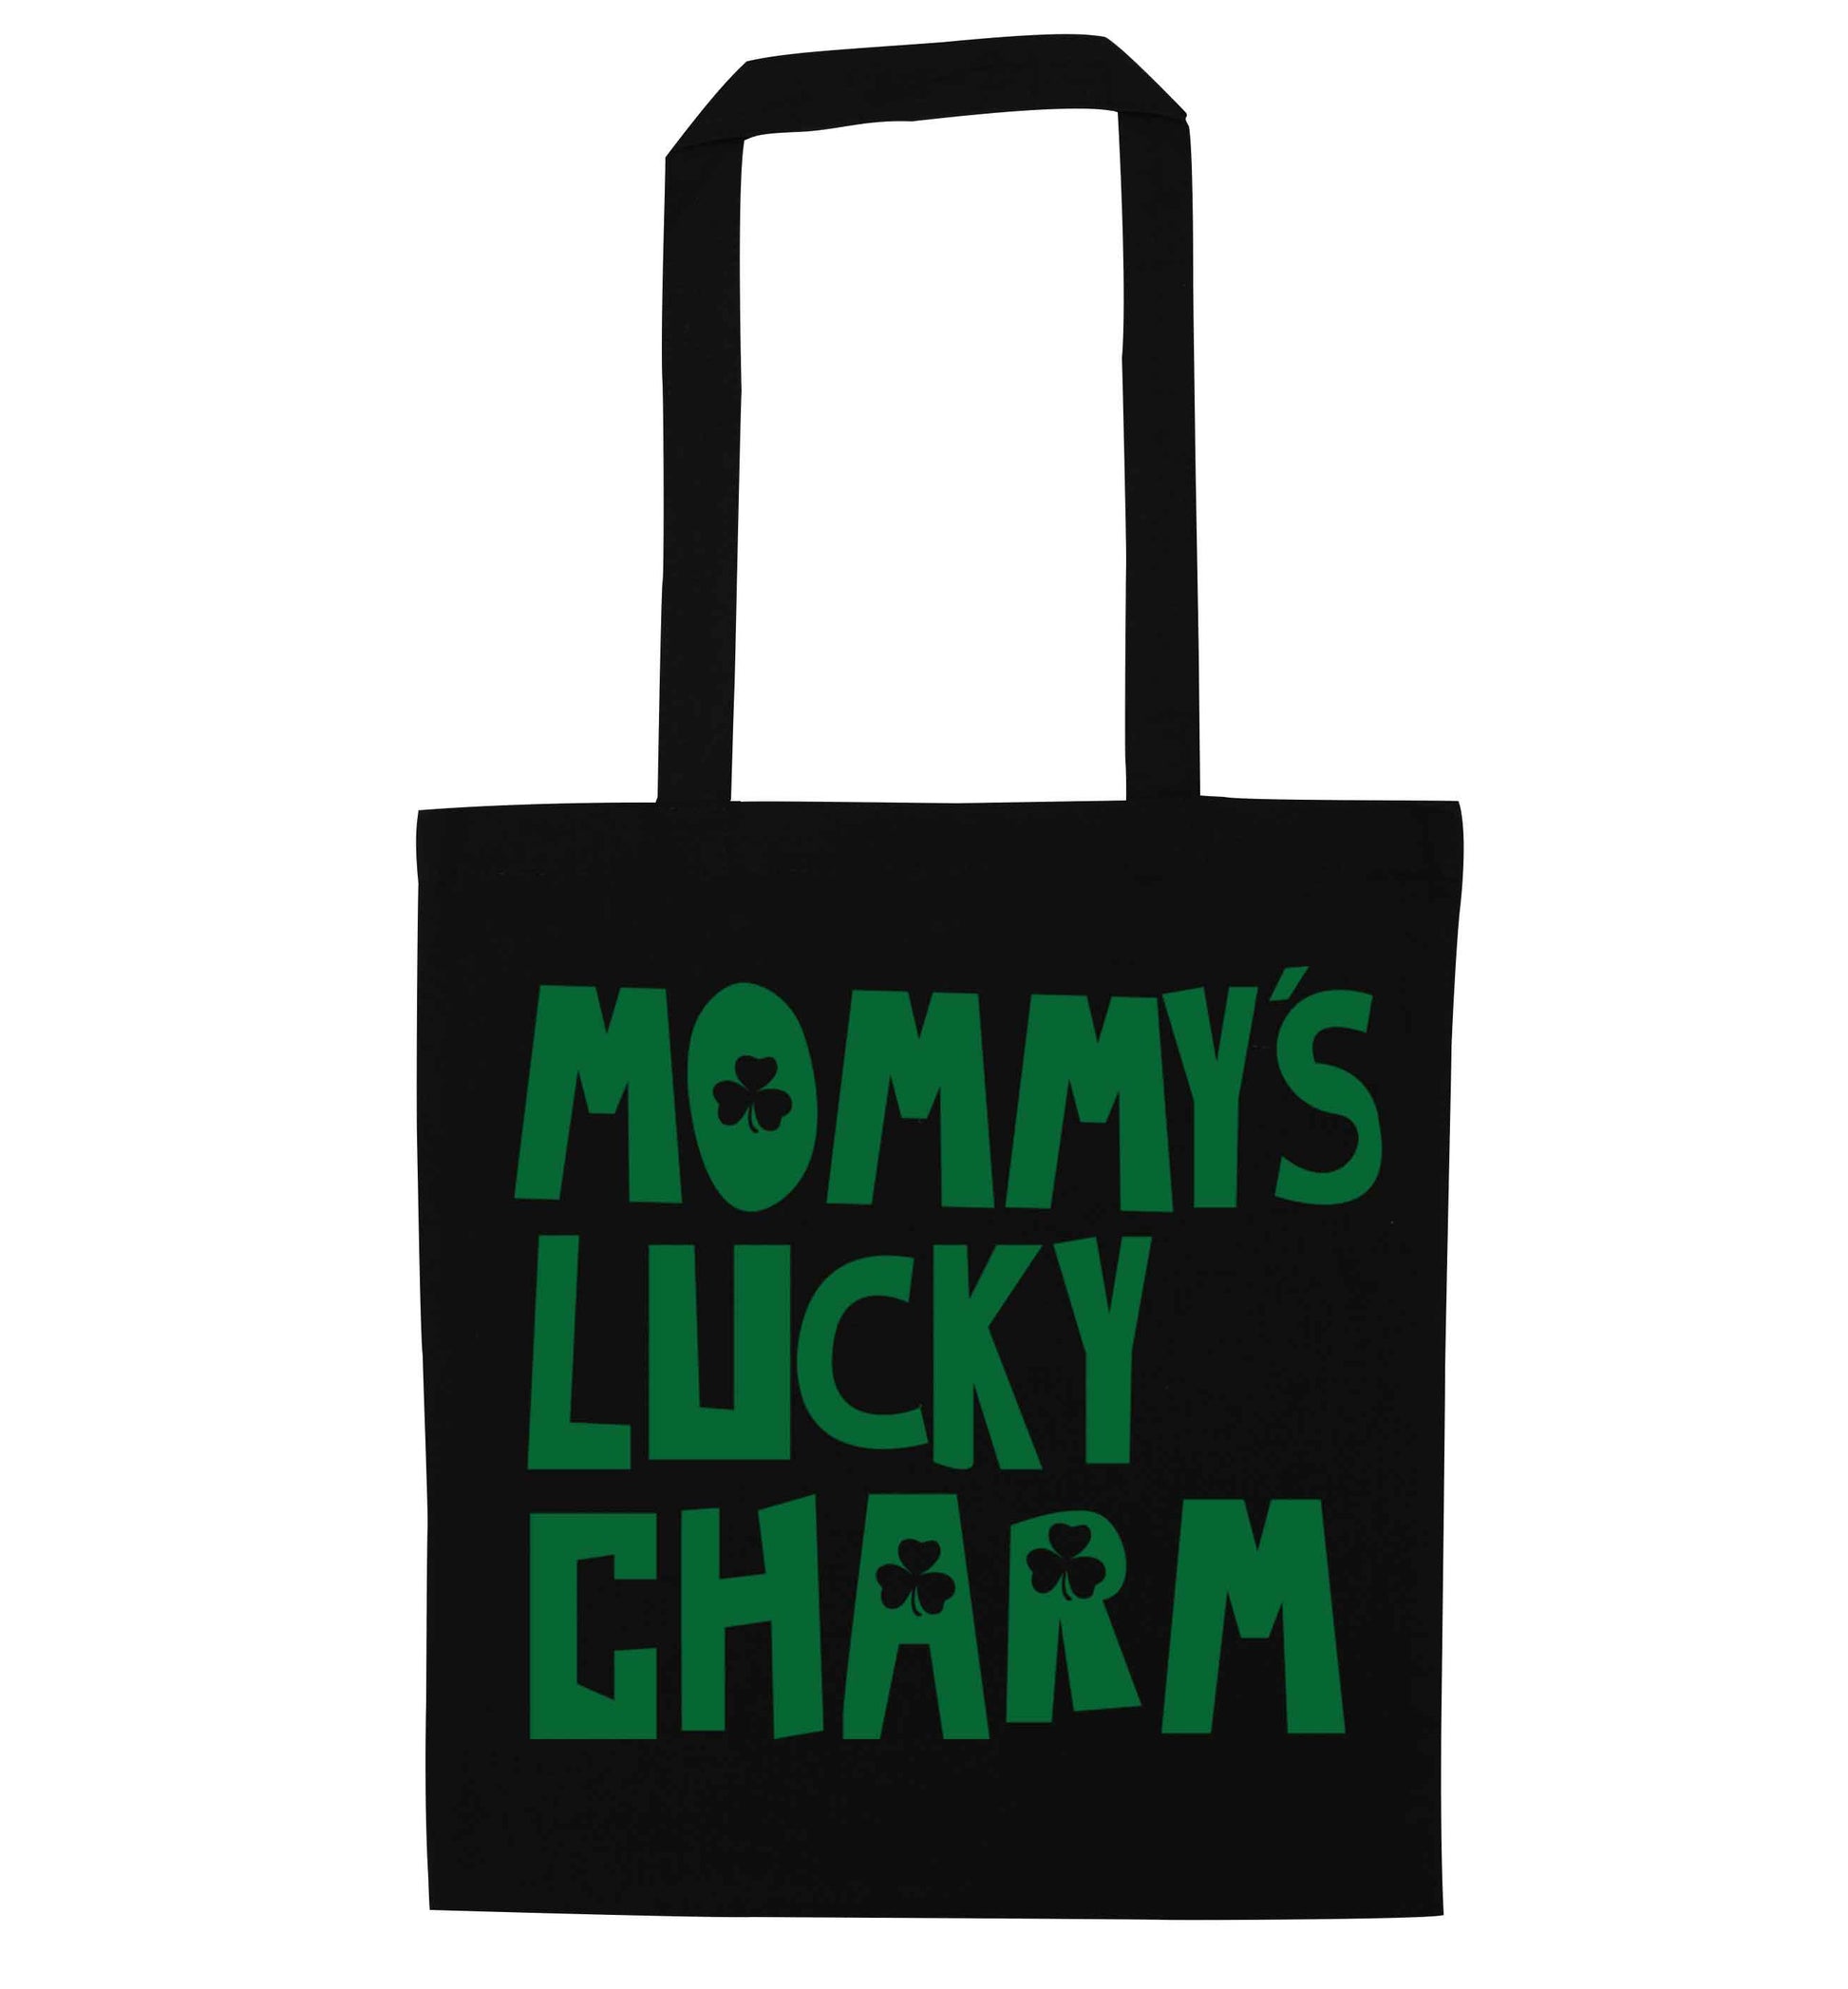 Mommy's lucky charm black tote bag